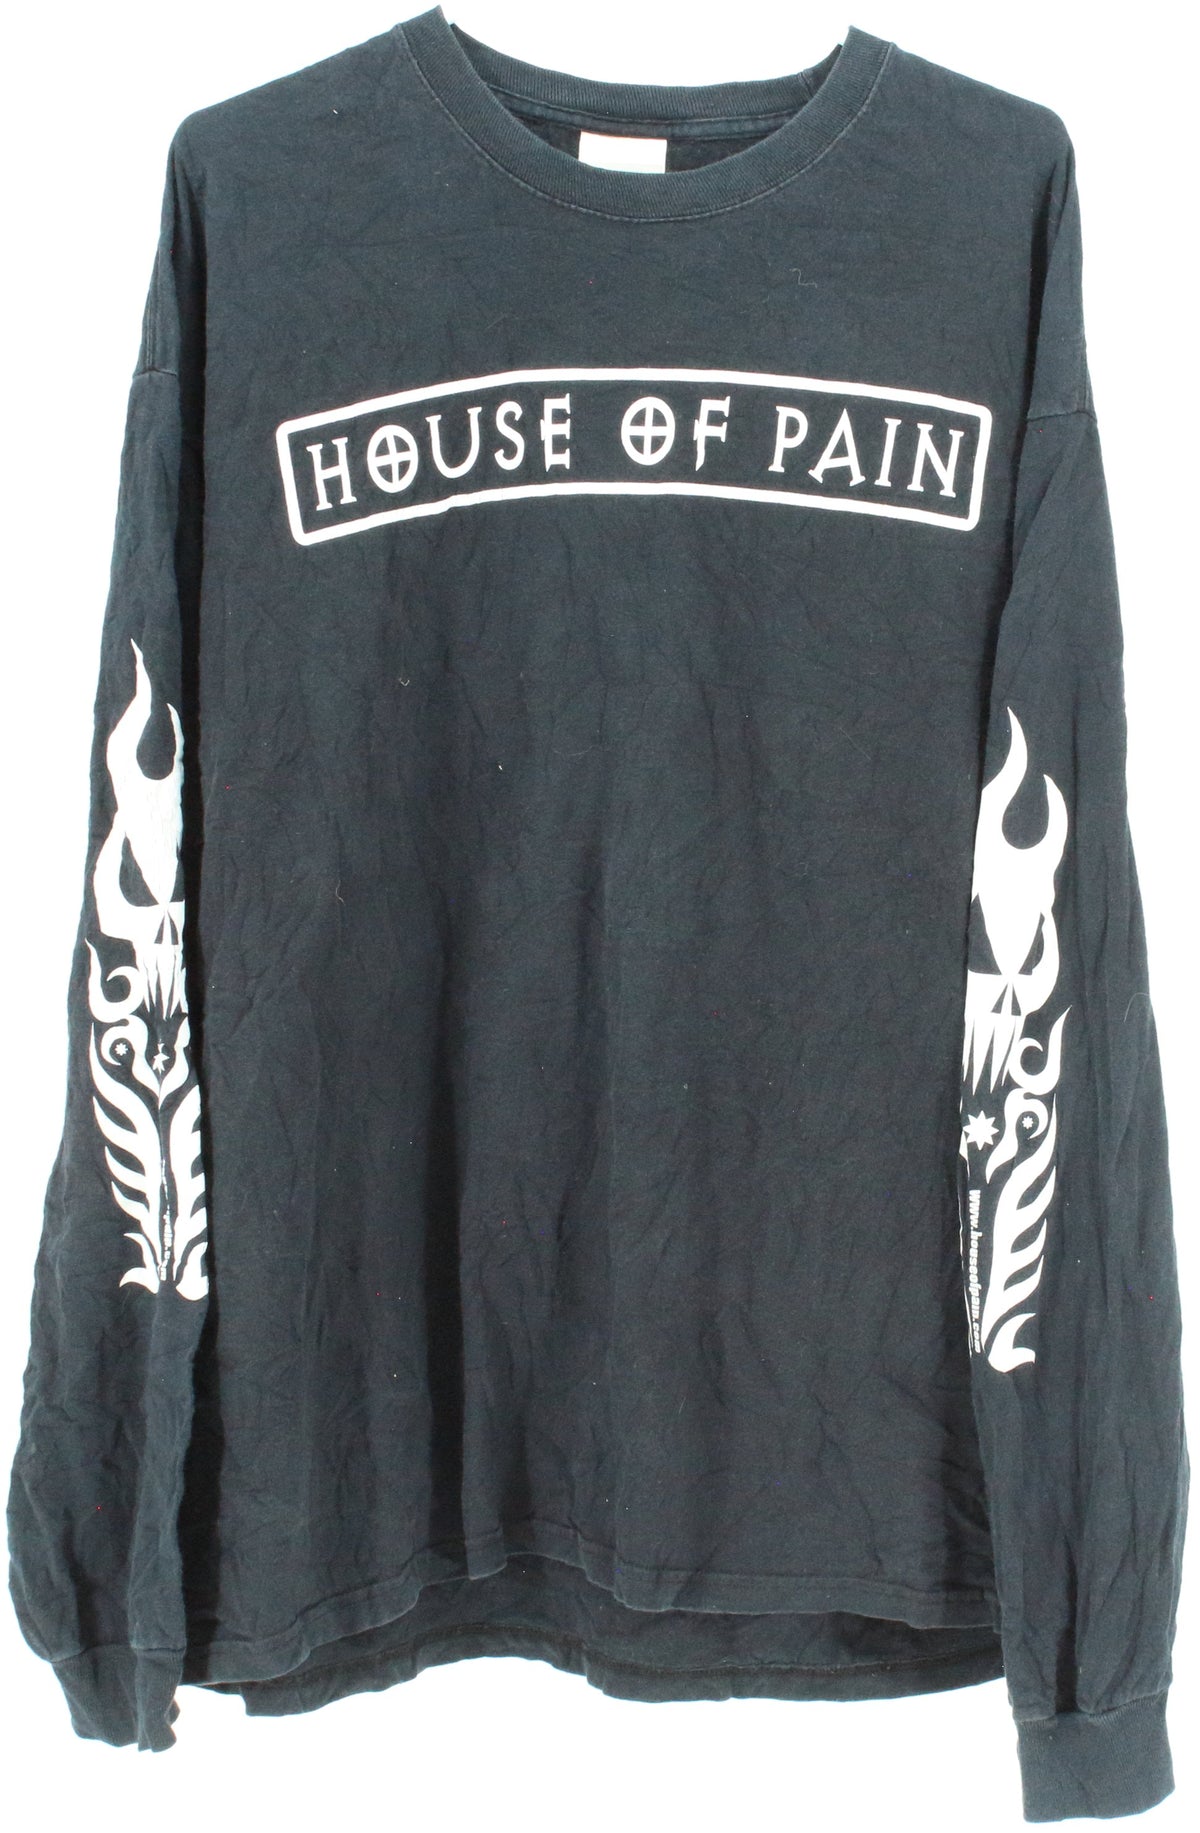 Port and Company House of Pain Black and White Long Sleeved T-Shirt